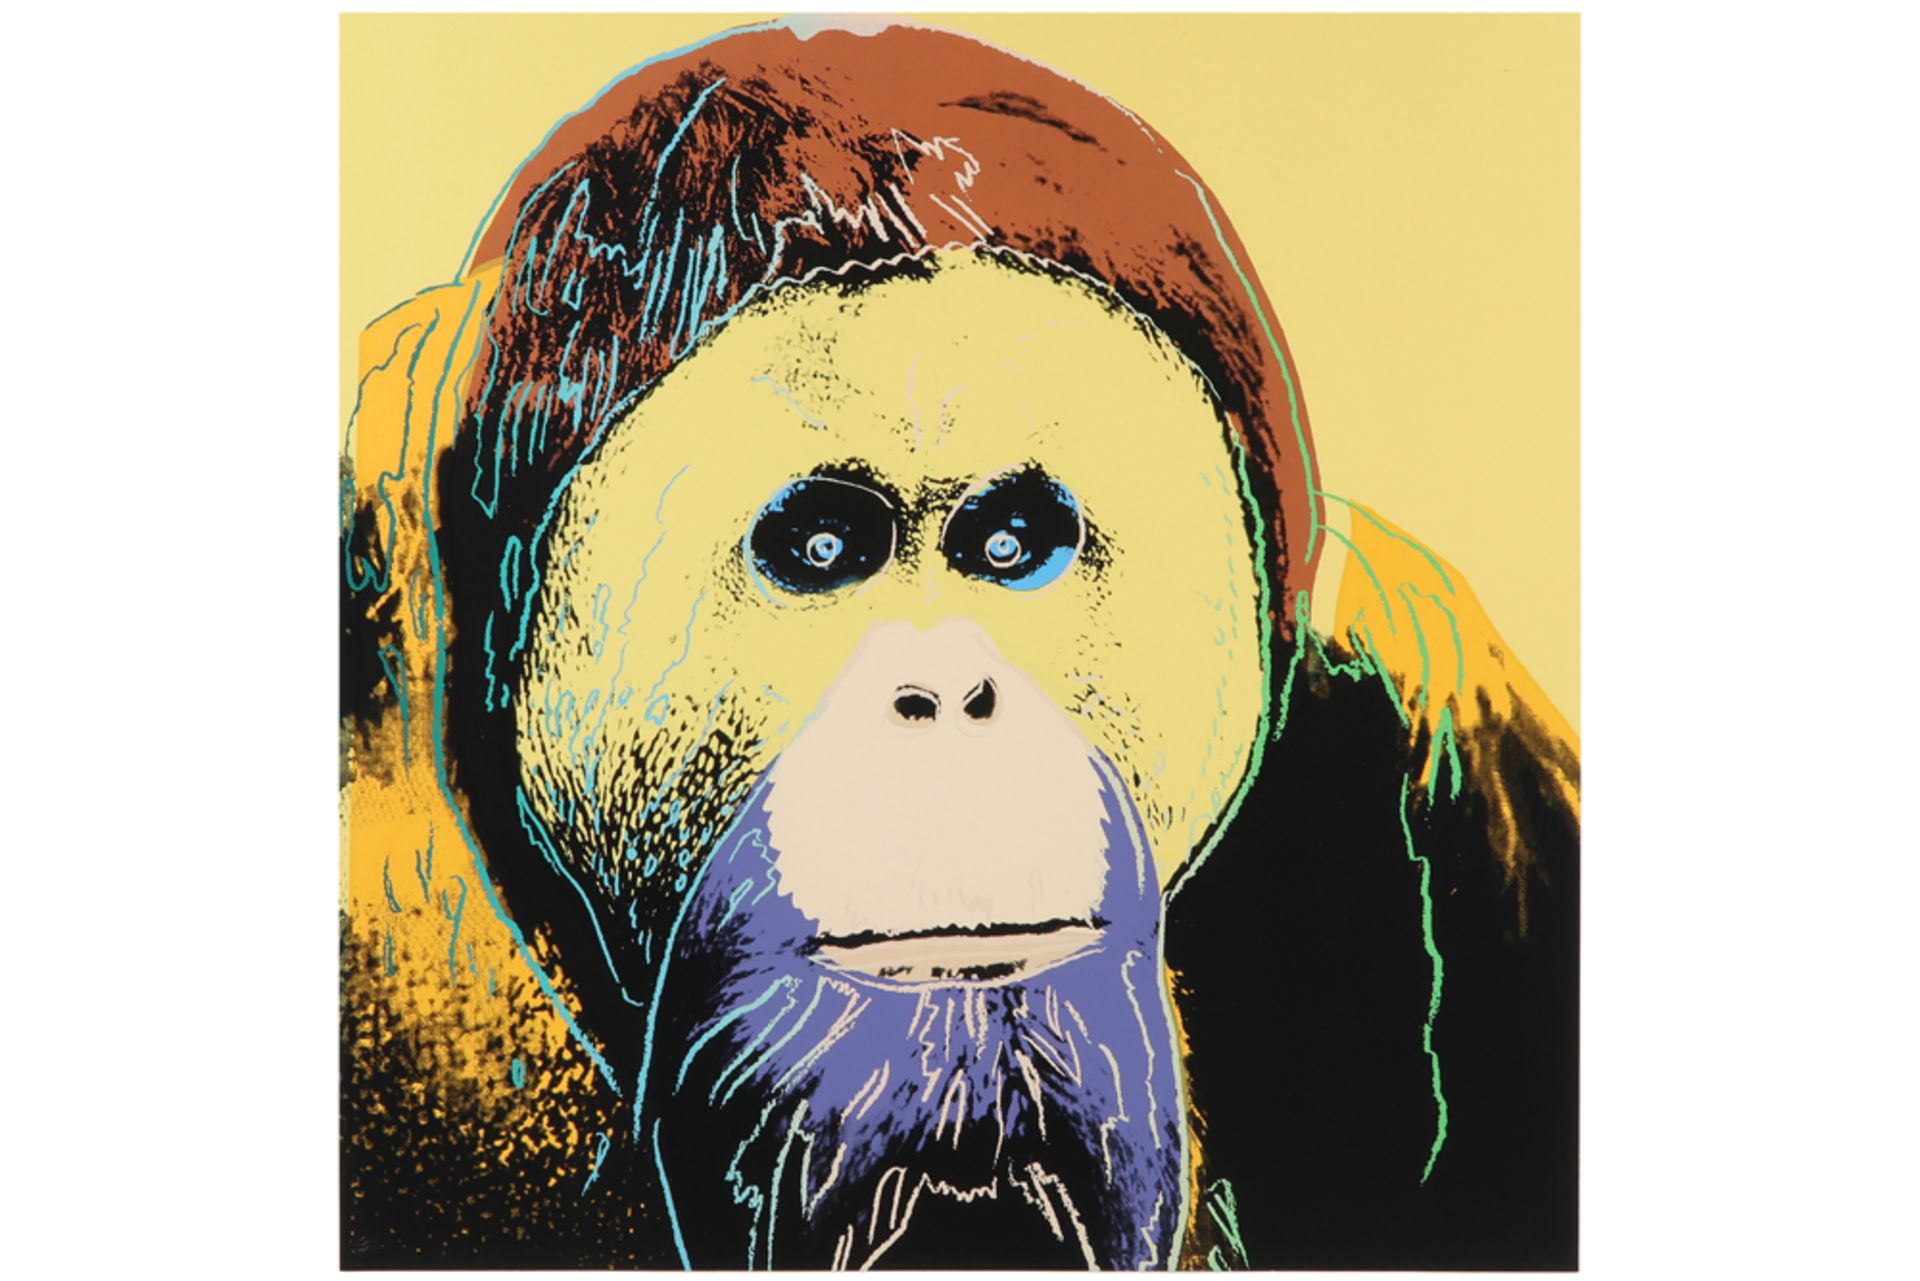 Andy Warhol "Urang Utan" silkscreen from the series "Endangered Species" with the blind stamp of